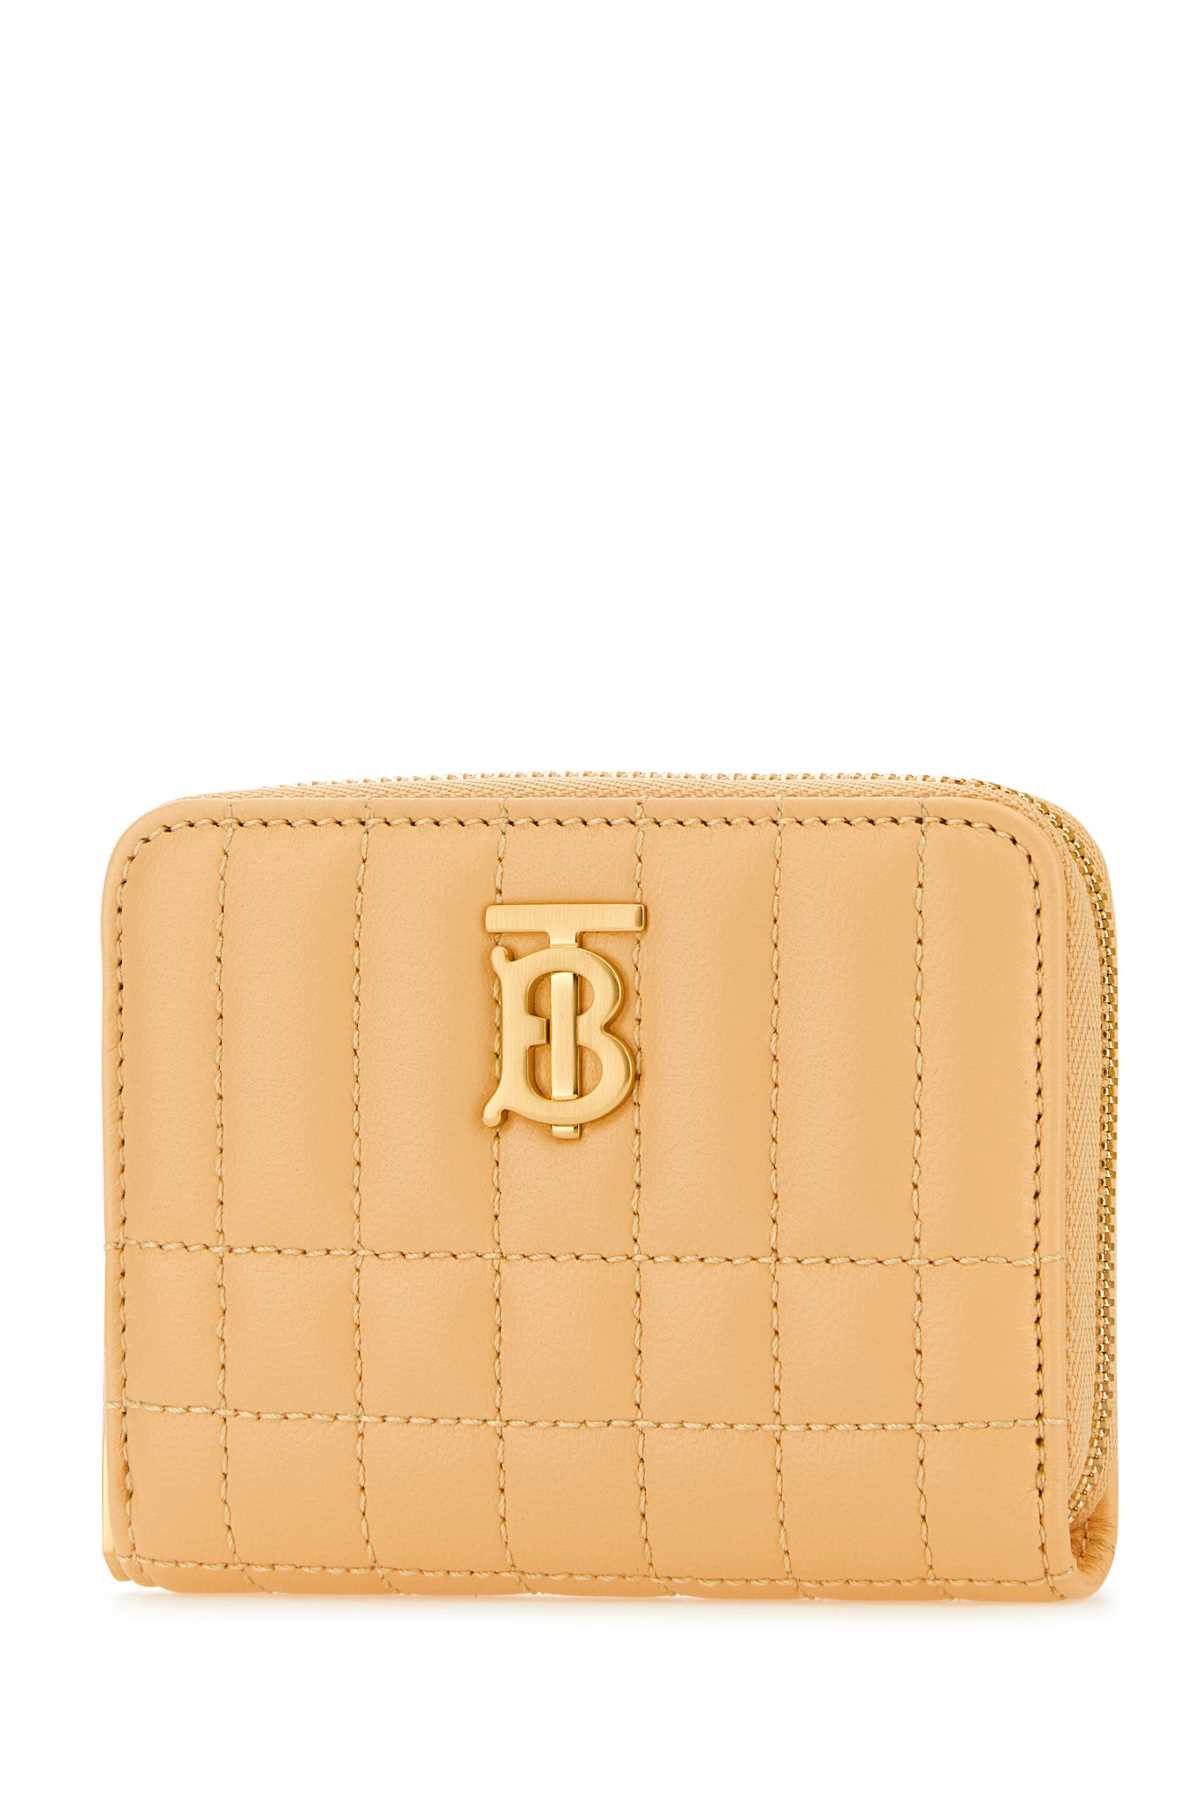 Shop Burberry Peach Nappa Leather Wallet In Goldensand